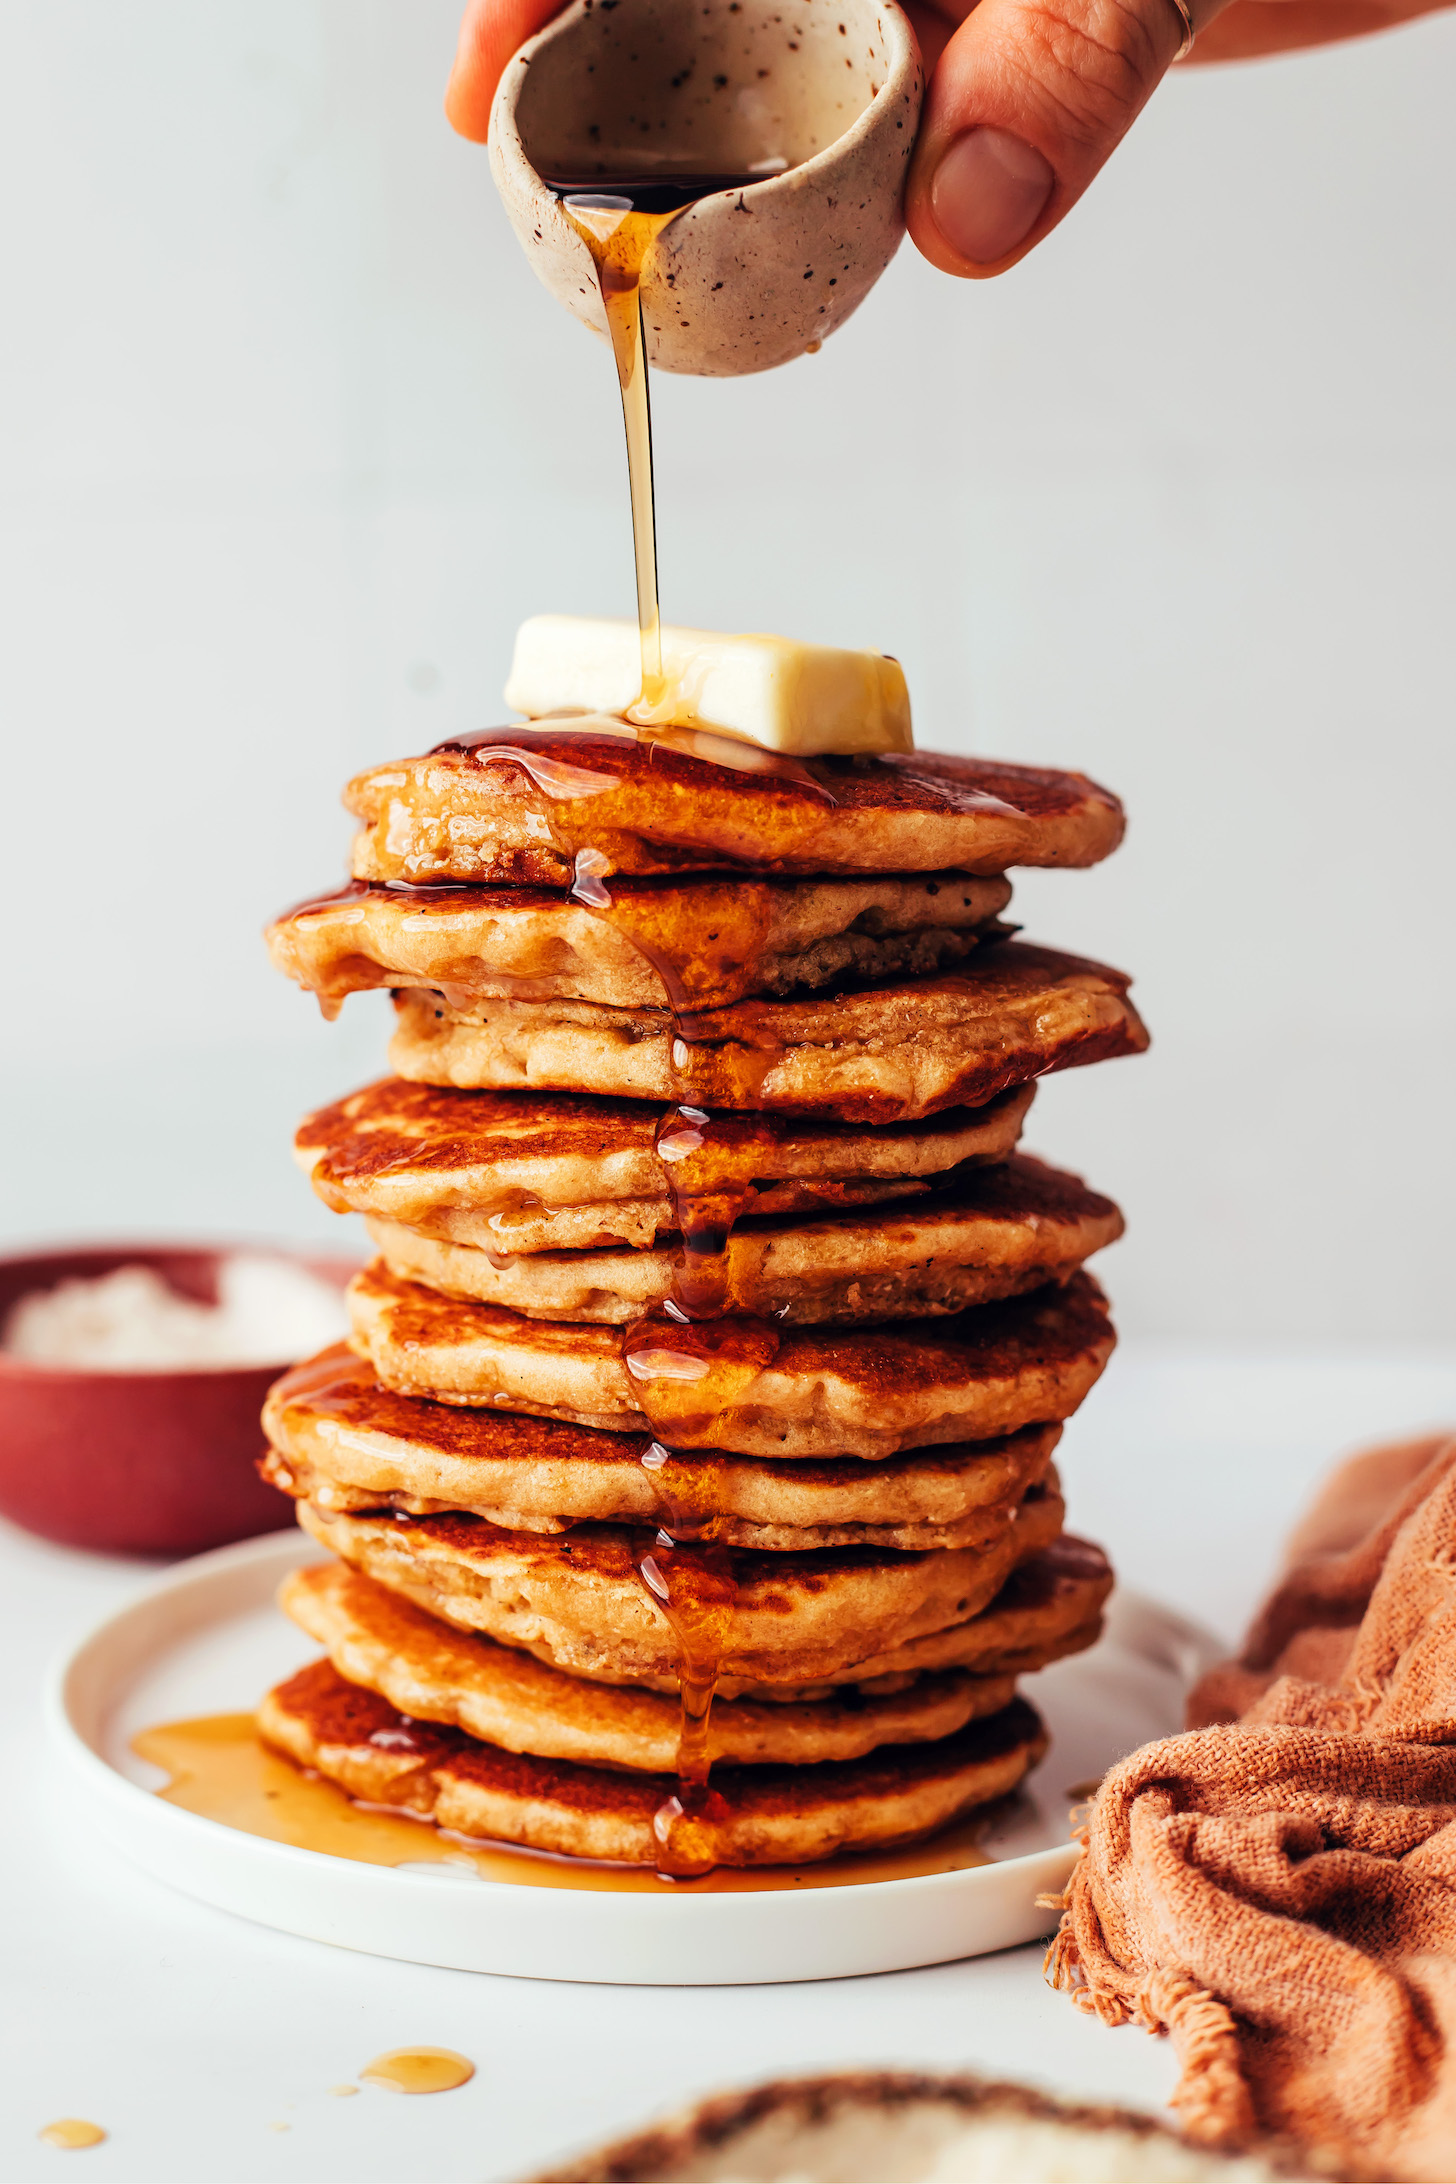 Pouring maple syrup onto a stack of fluffy gluten-free pancakes